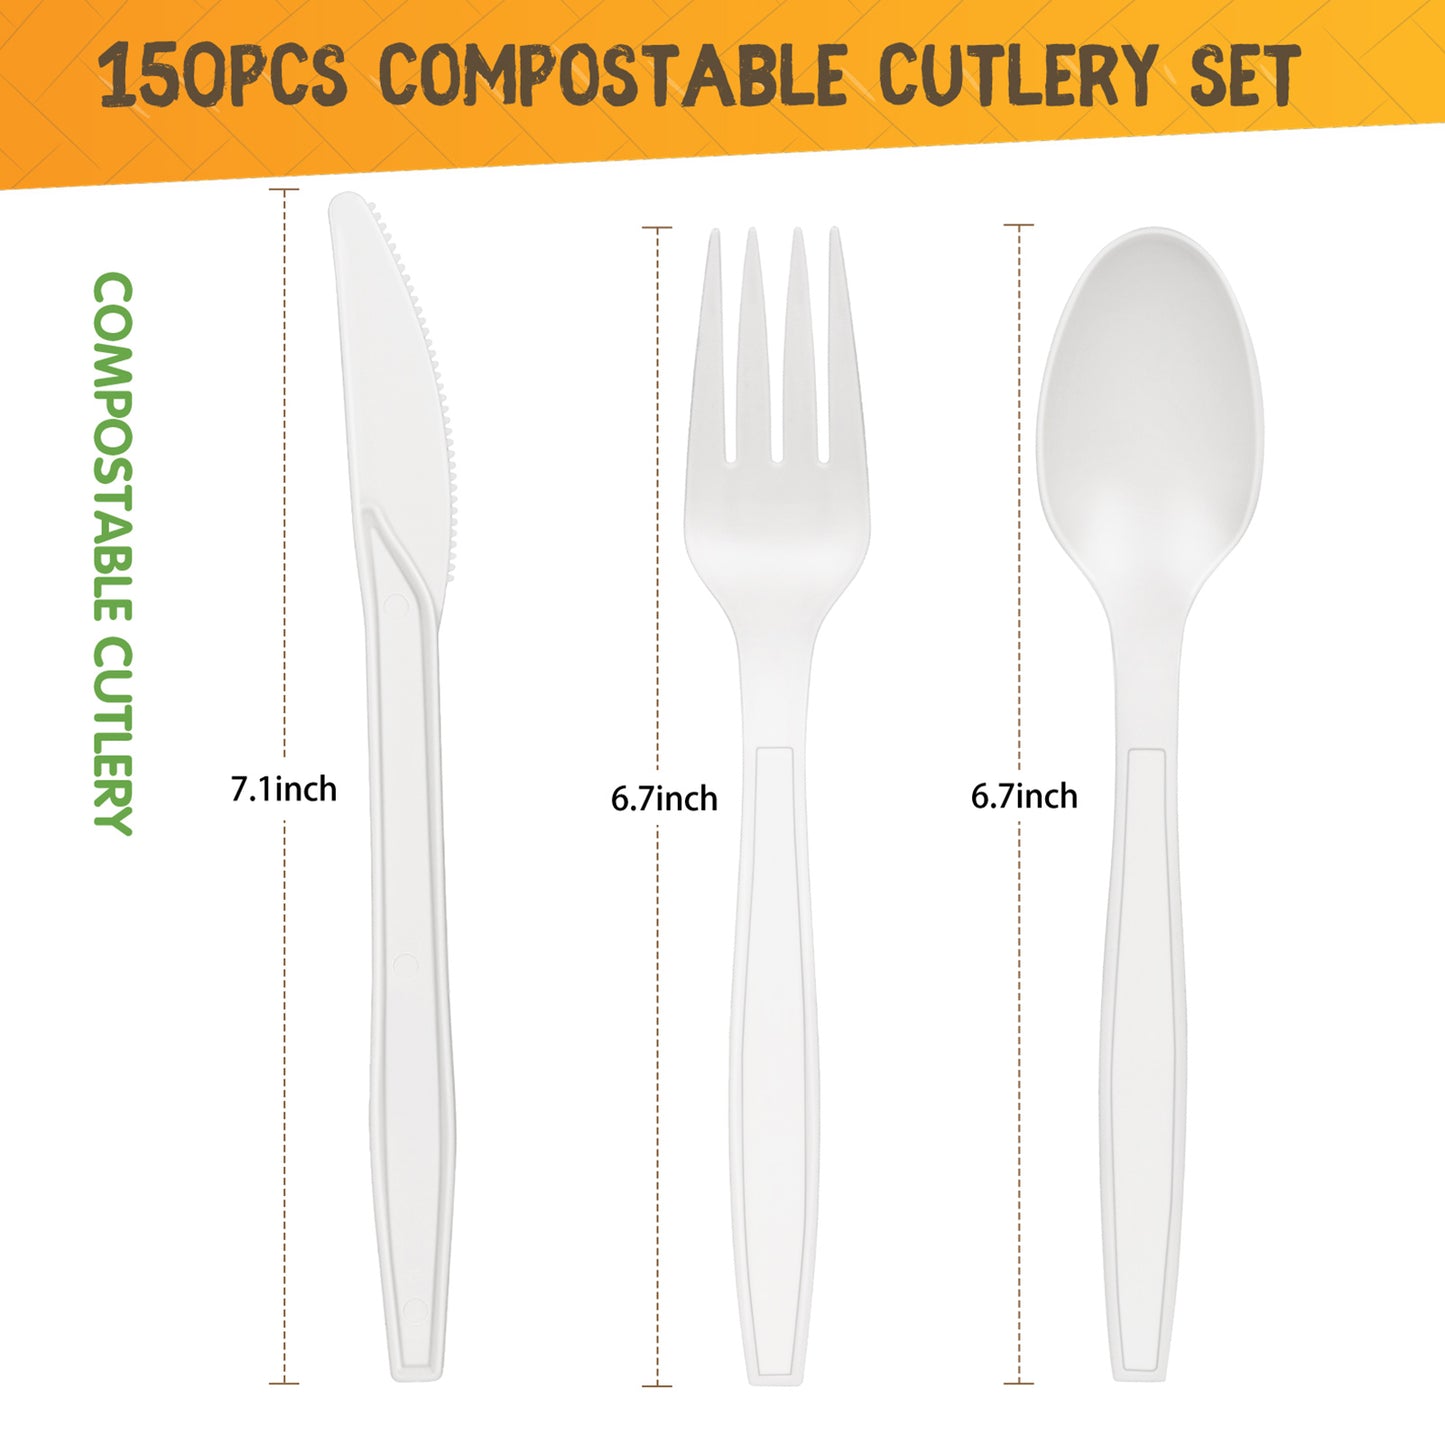 350pcs Compostable Paper Plates Set Eco-friendly Disposable Paper Plates  Cutlery Includes Biodegradable Plates, Forks, Knives, Spoons, Cups and  Straws